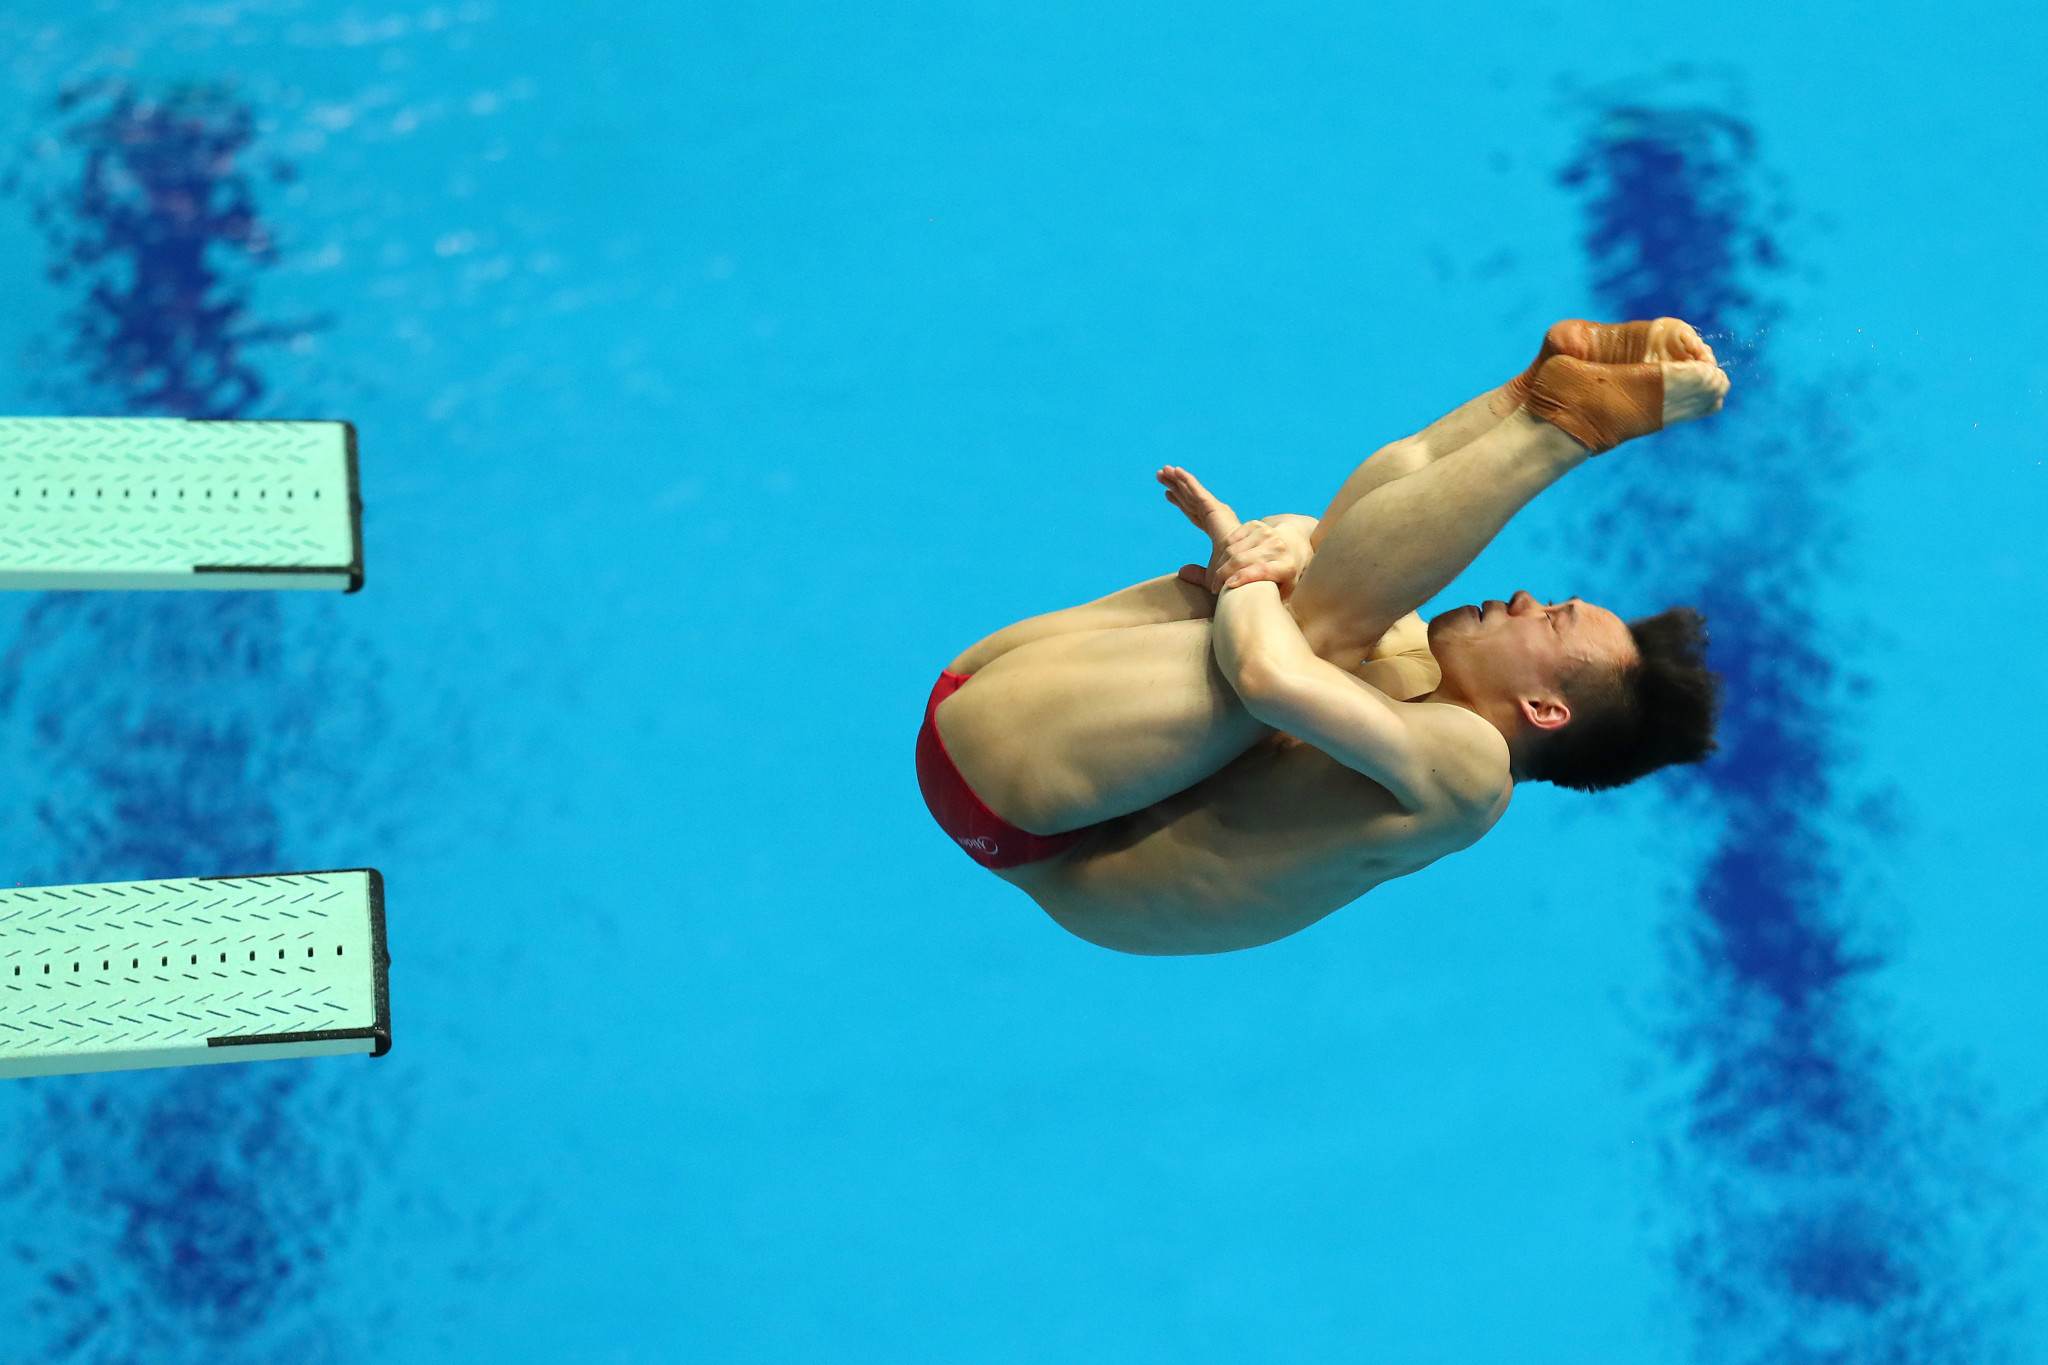 Xie Siyi won gold after a mistake by Britain's Jack Laugher to keep China's diving domination intact ©Getty Images